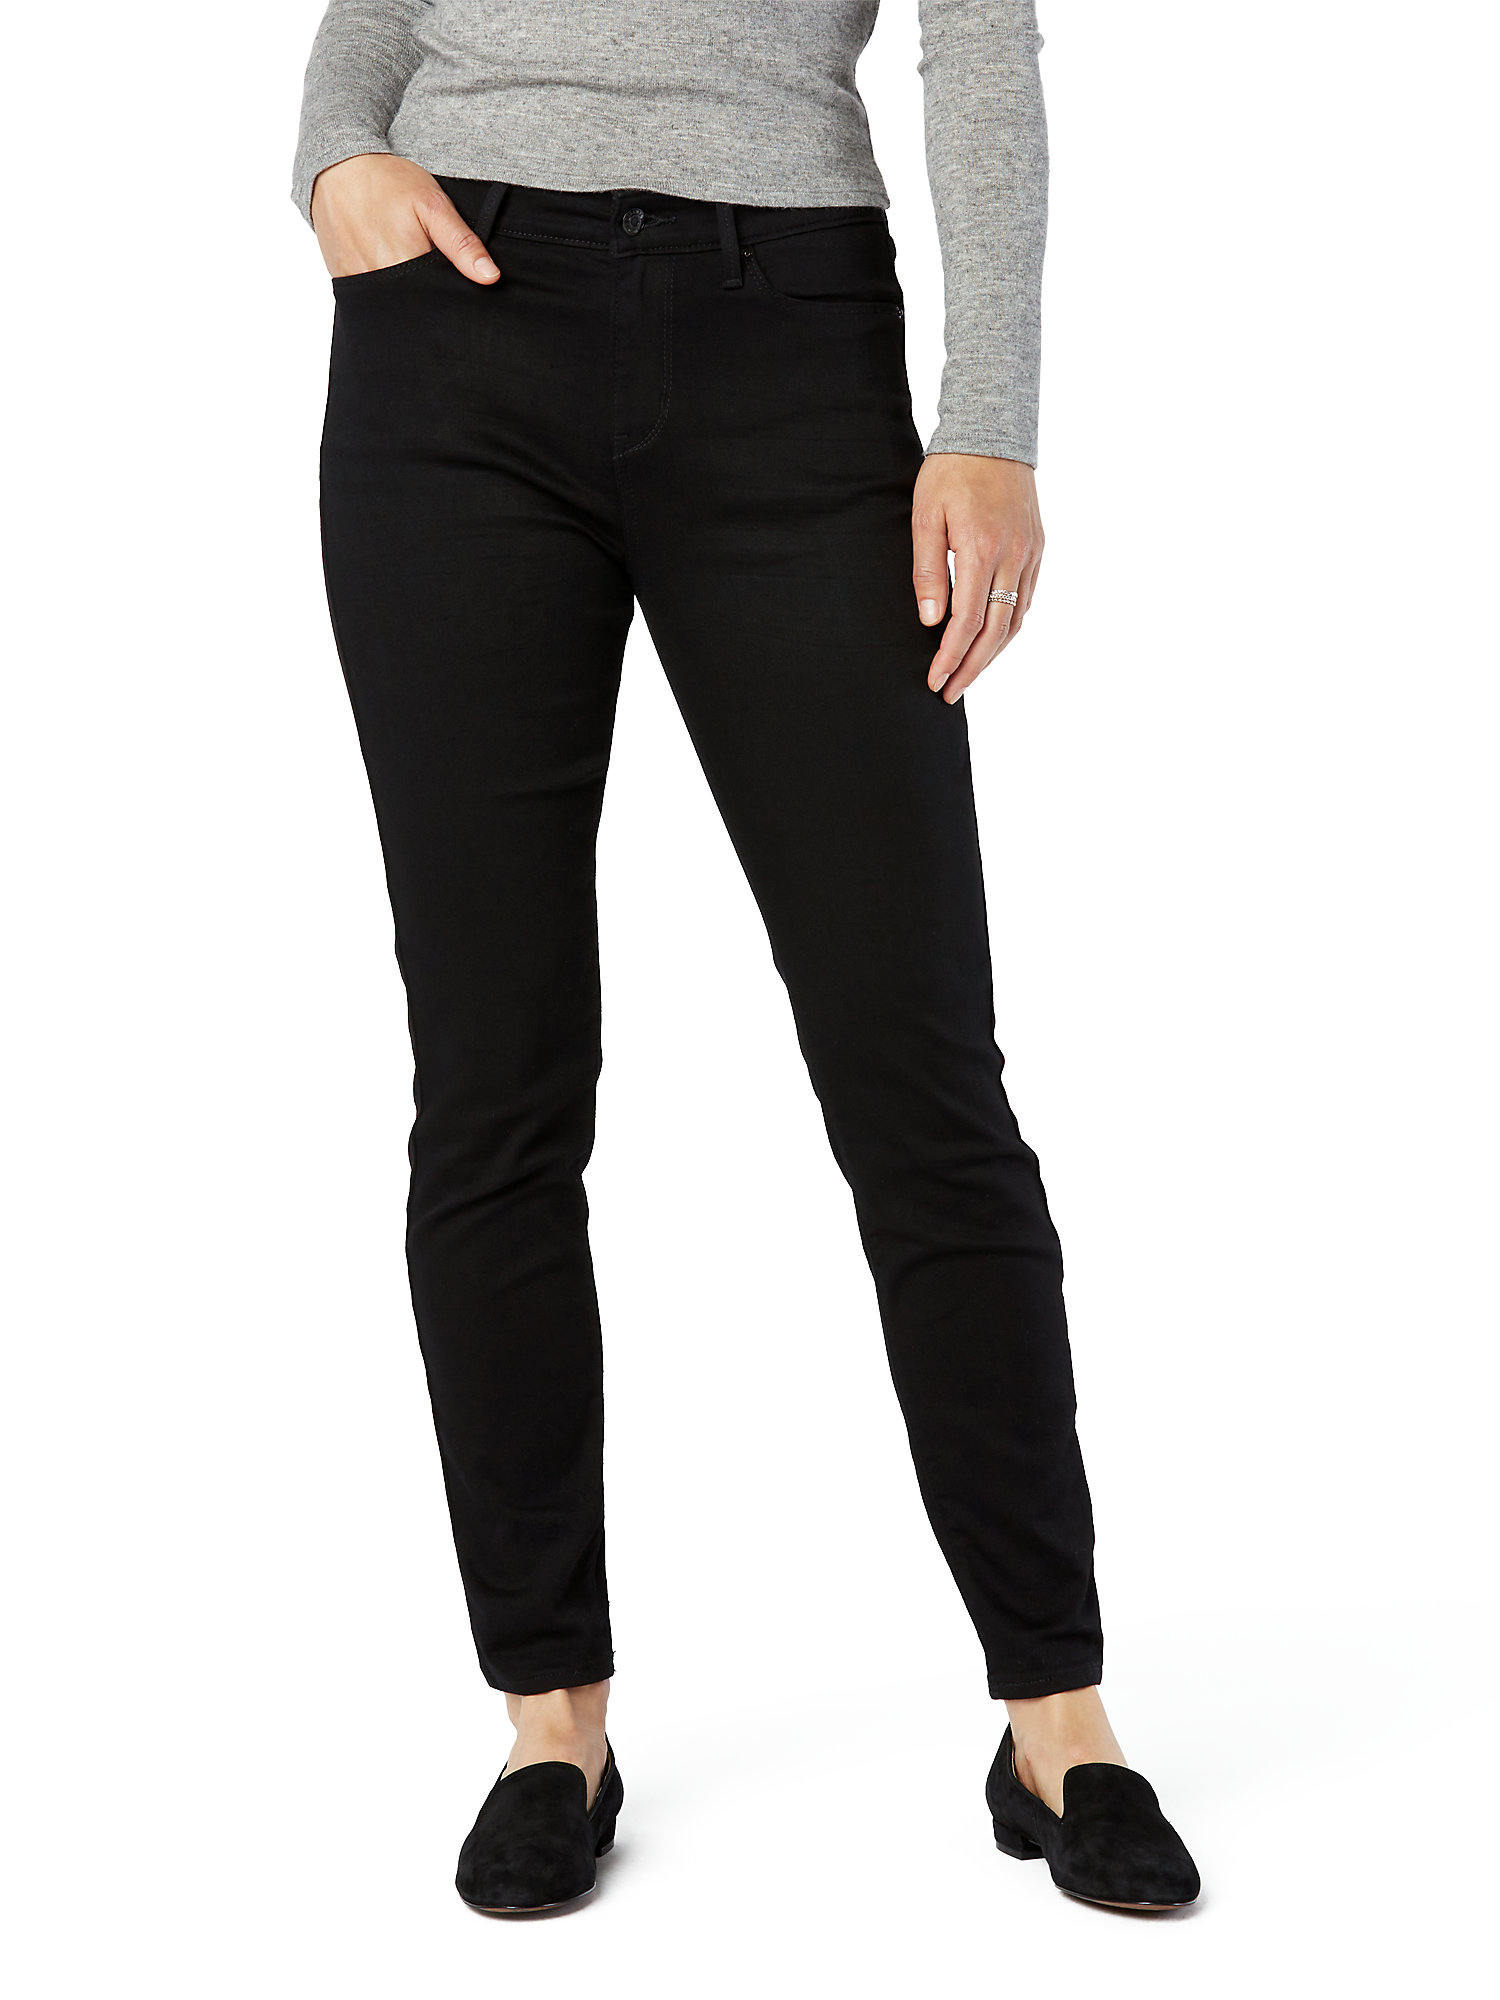 Signature by Levi Strauss & Co. Women's and Women's Plus Mid Rise Skinny Jeans - image 1 of 3